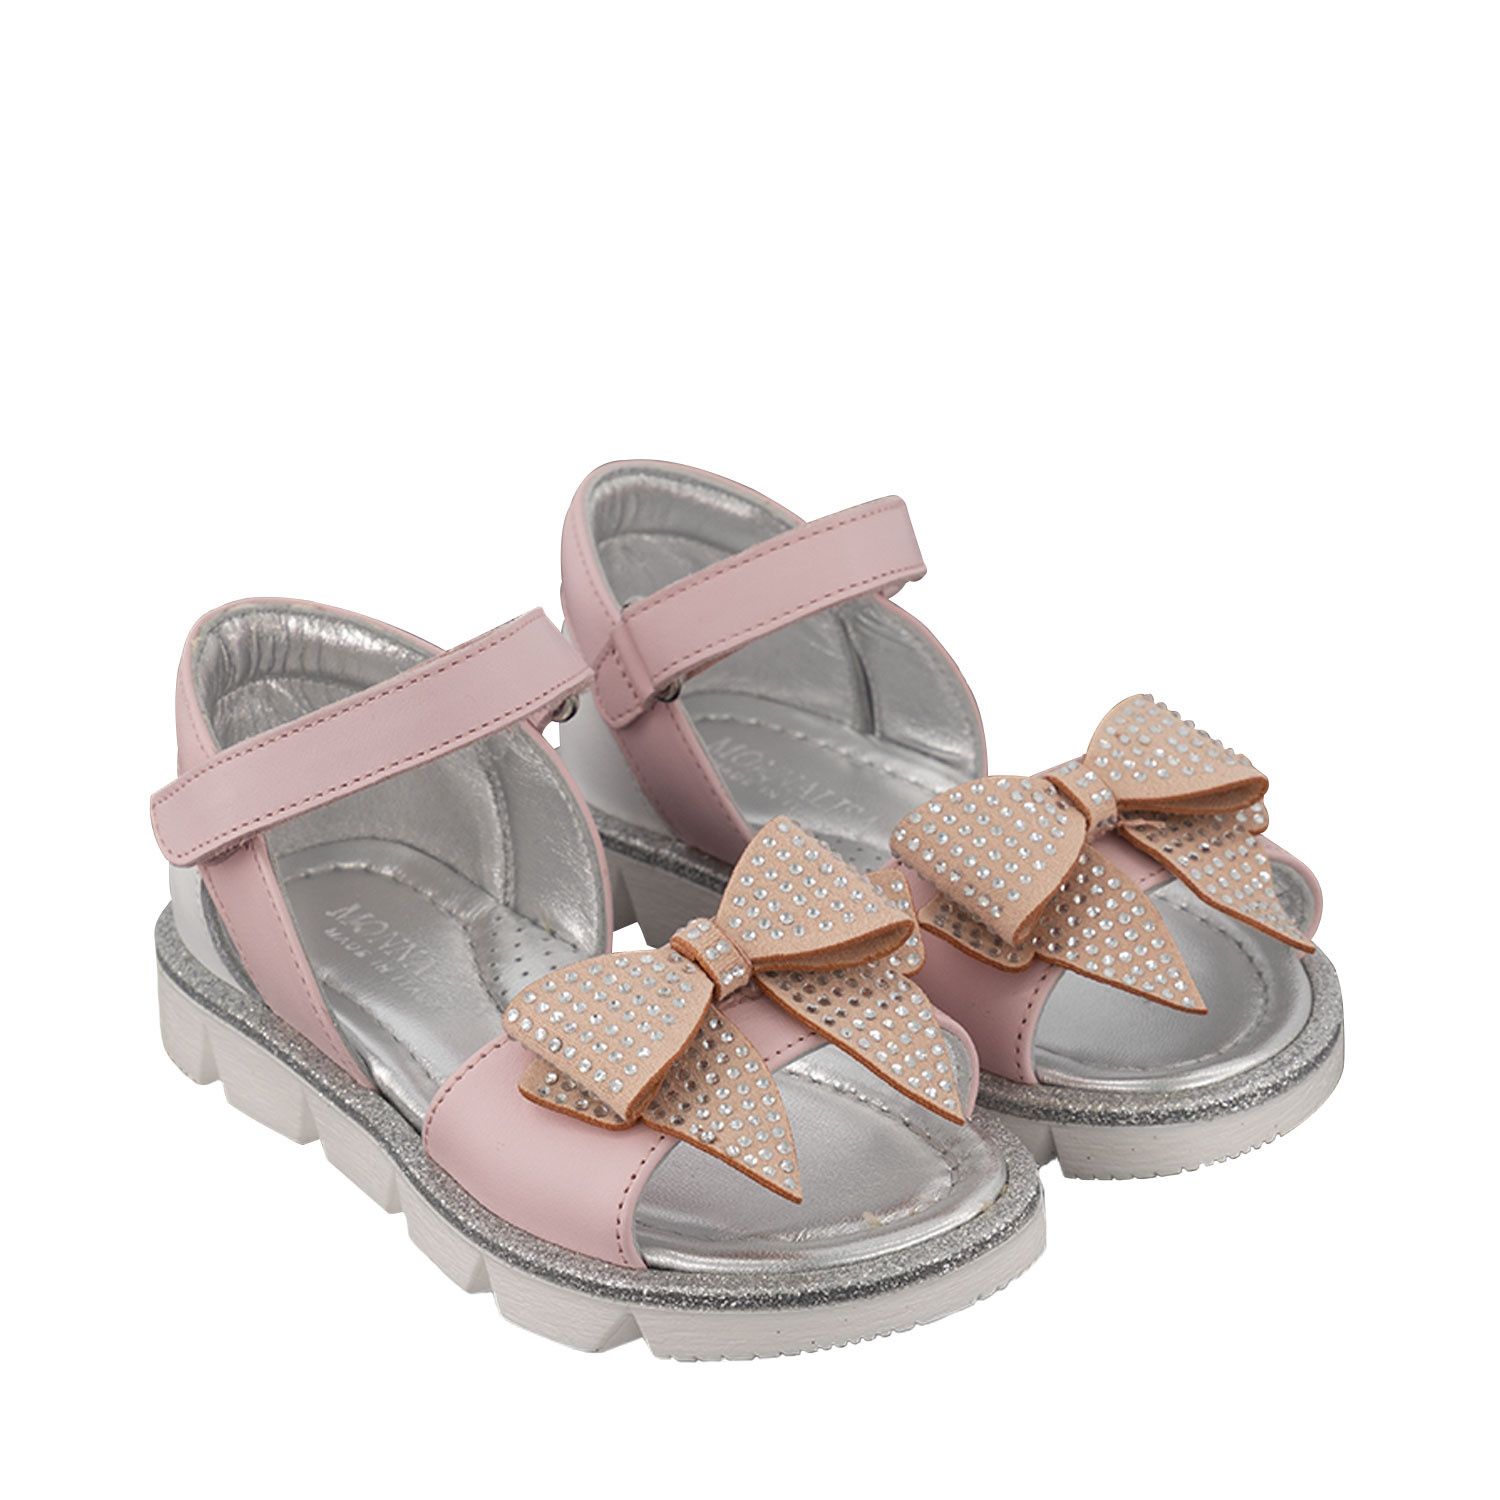 Picture of MonnaLisa 839004 kids sandals light pink